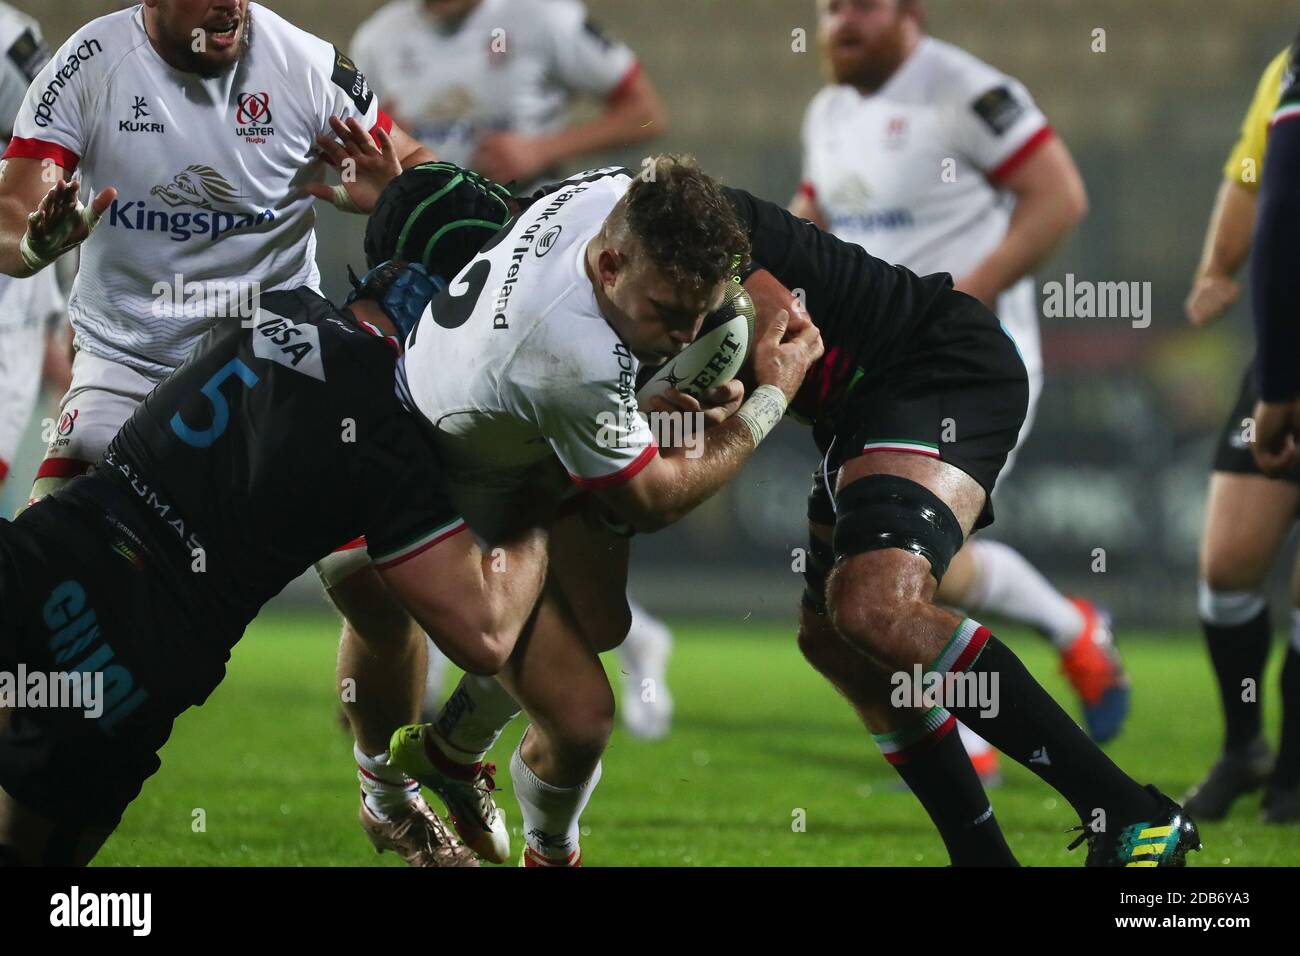 Parma, Italy. 16th Nov, 2020. parma, Italy, Sergio Lanfranchi stadium, 16 Nov 2020, Ian Madigan (Ulster) carries the ball during Zebre Rugby vs Ulster Rugby - Rugby Guinness Pro 14 match - Credit: LM/Massimiliano Carnabuci Credit: Massimiliano Carnabuci/LPS/ZUMA Wire/Alamy Live News Stock Photo